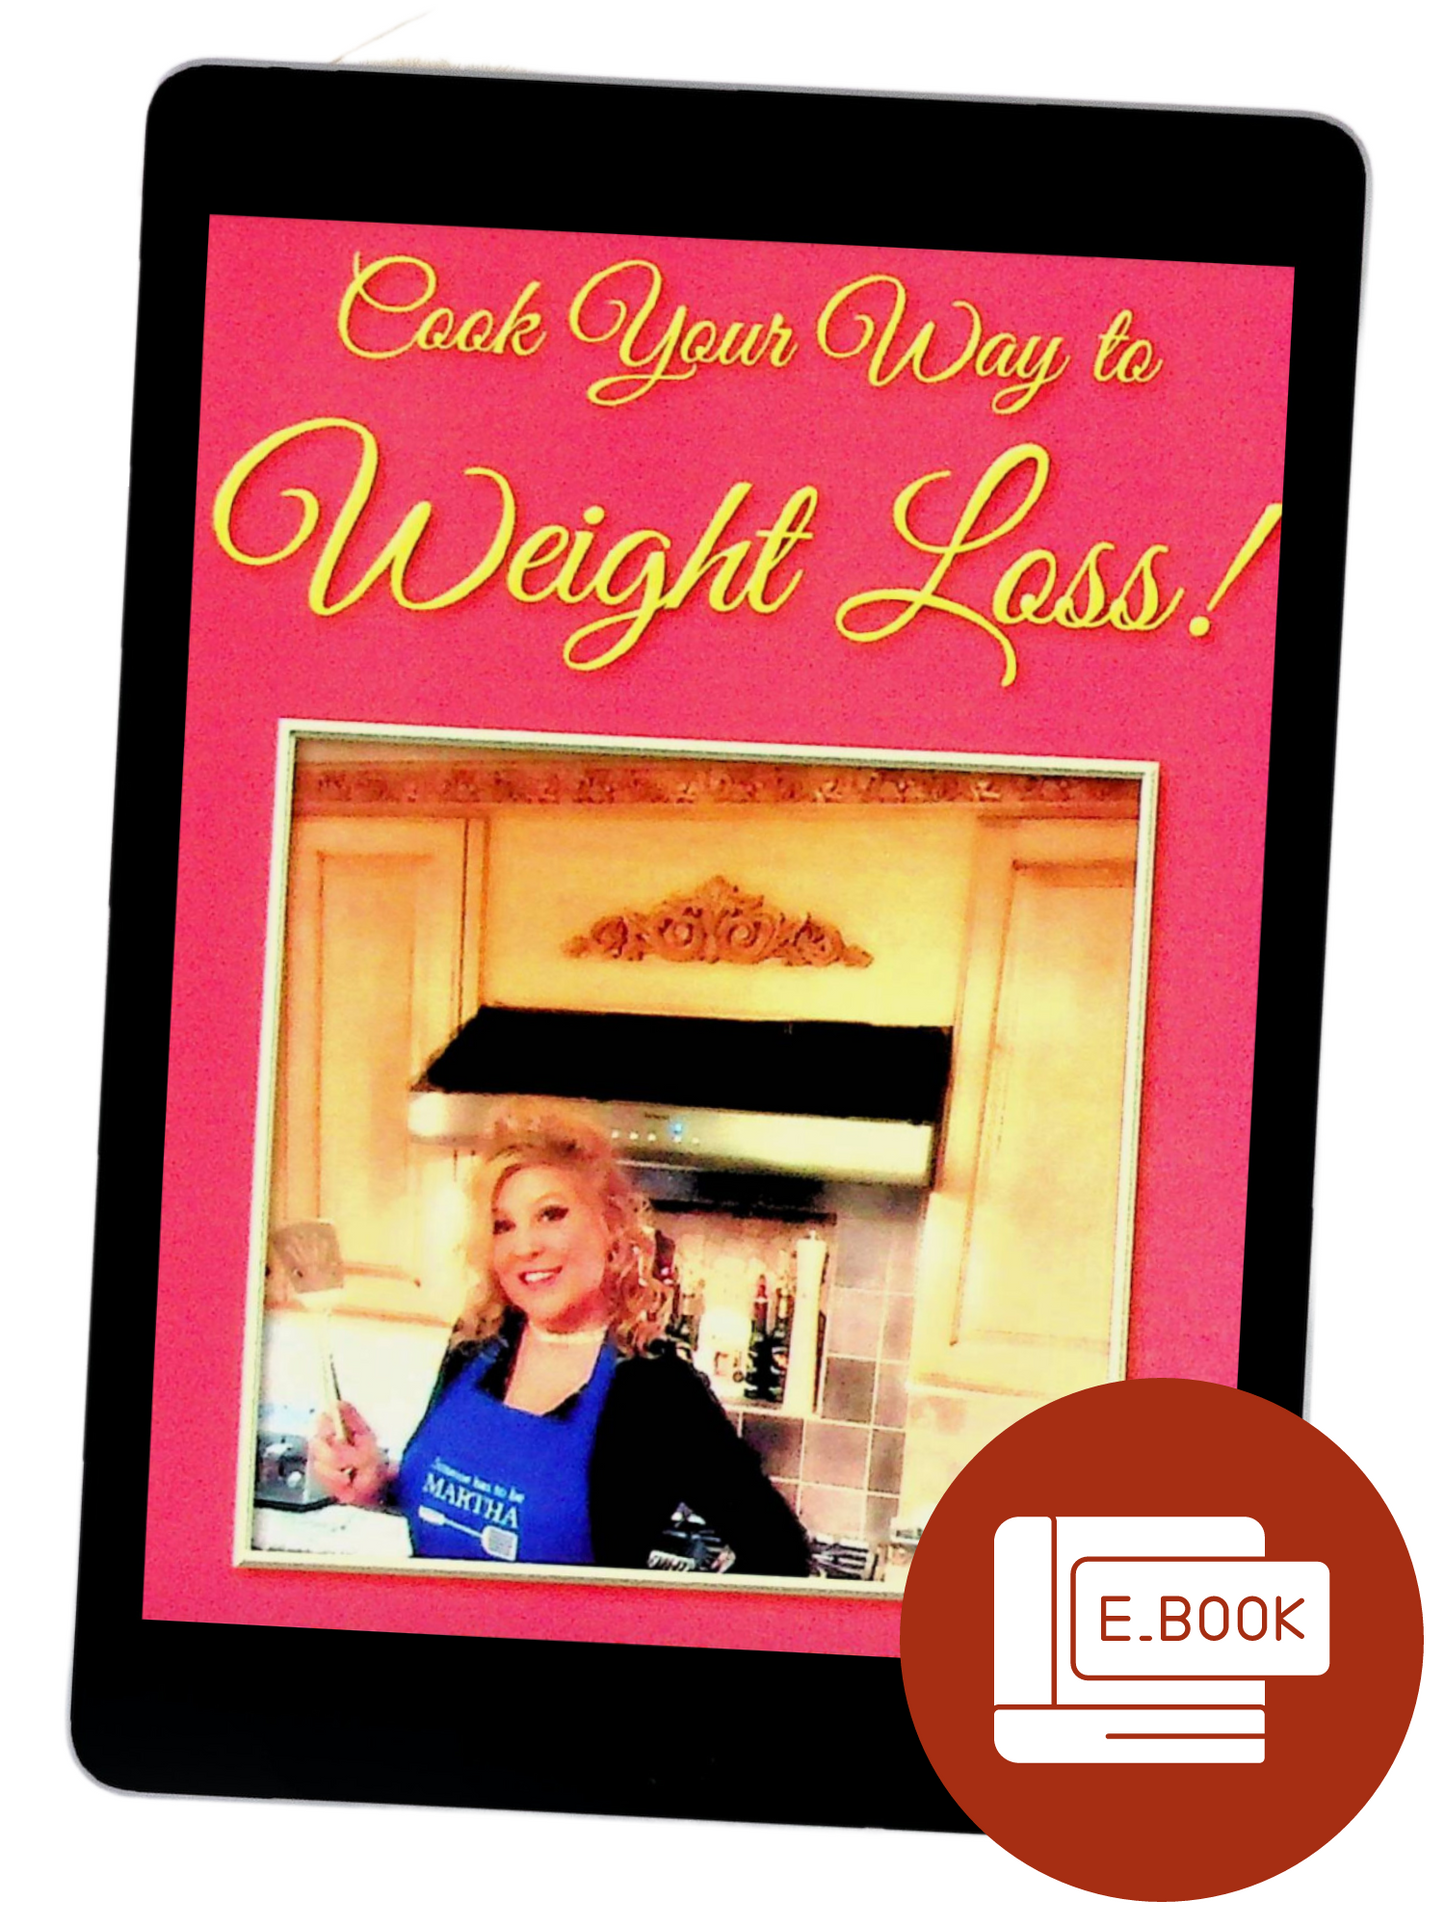 Cook Your Way to Weight Loss [E-Book]